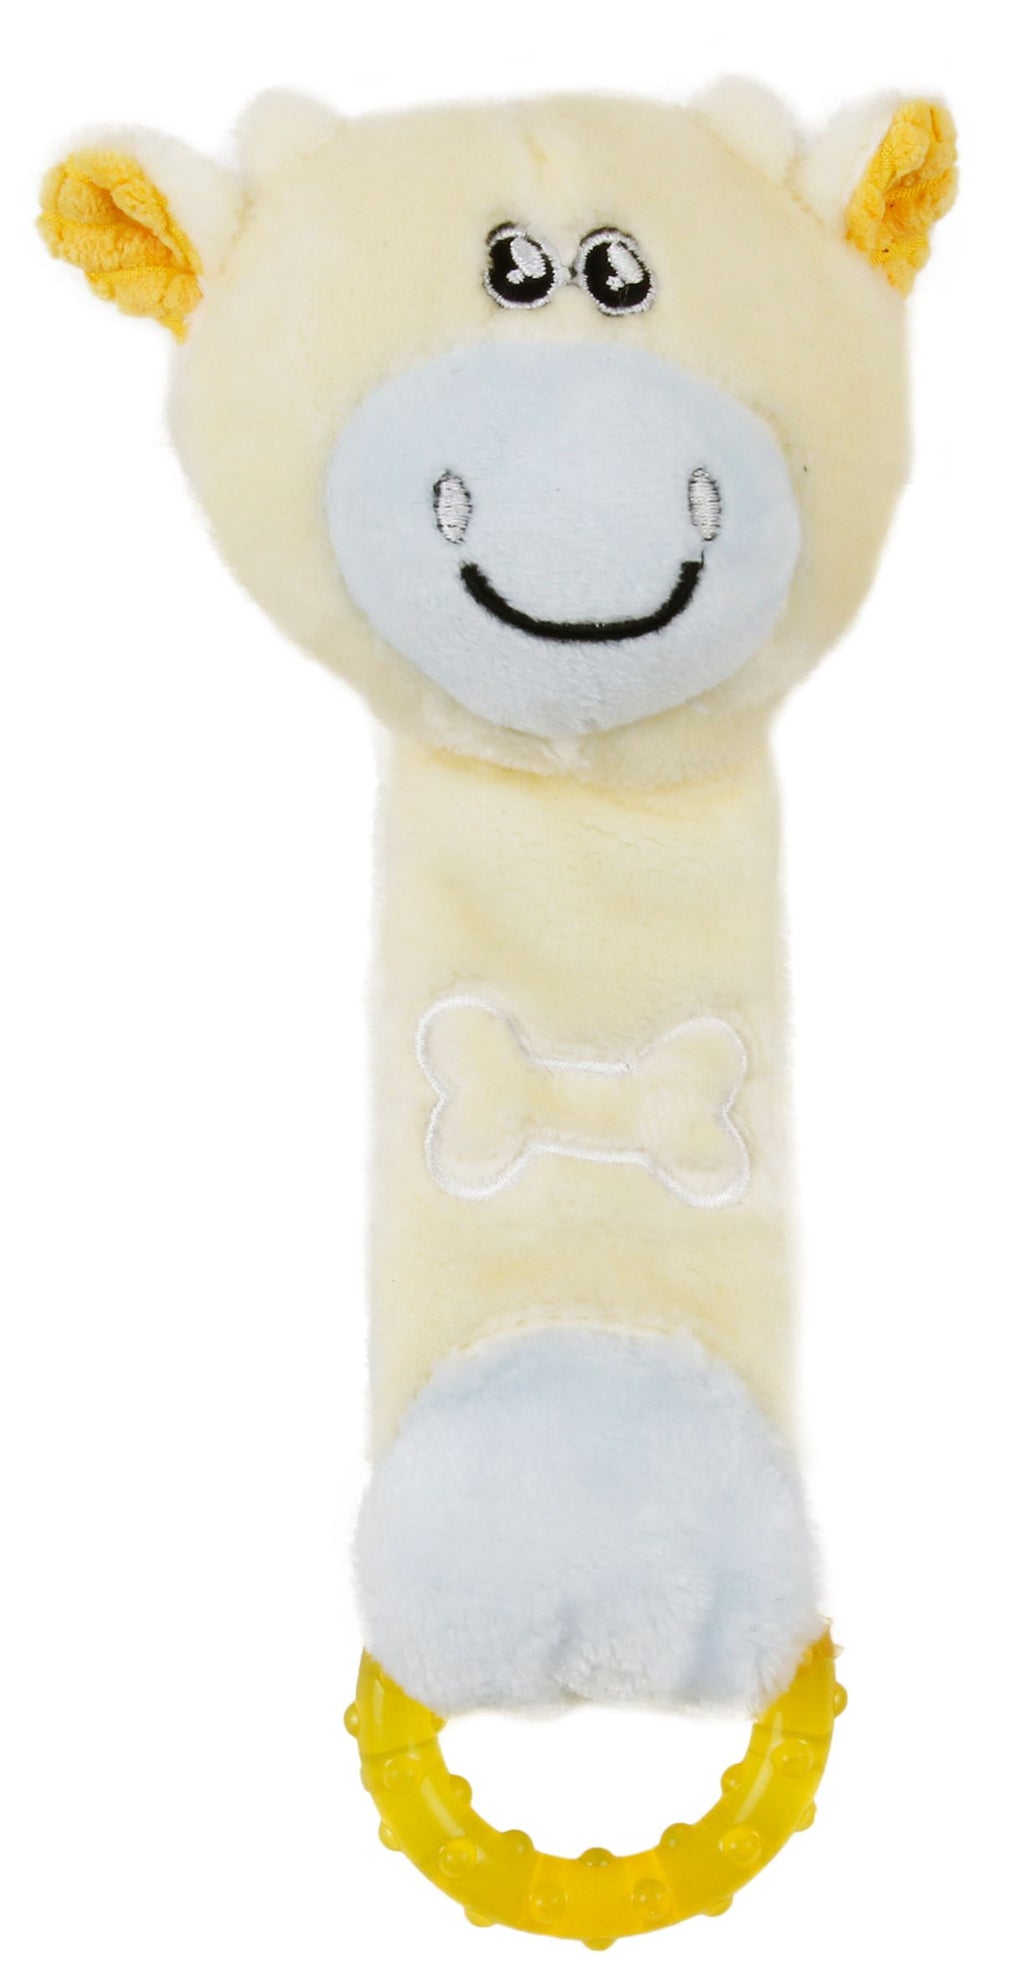 Pet ® Moo-Born' and Rubber Squeaking Teething a